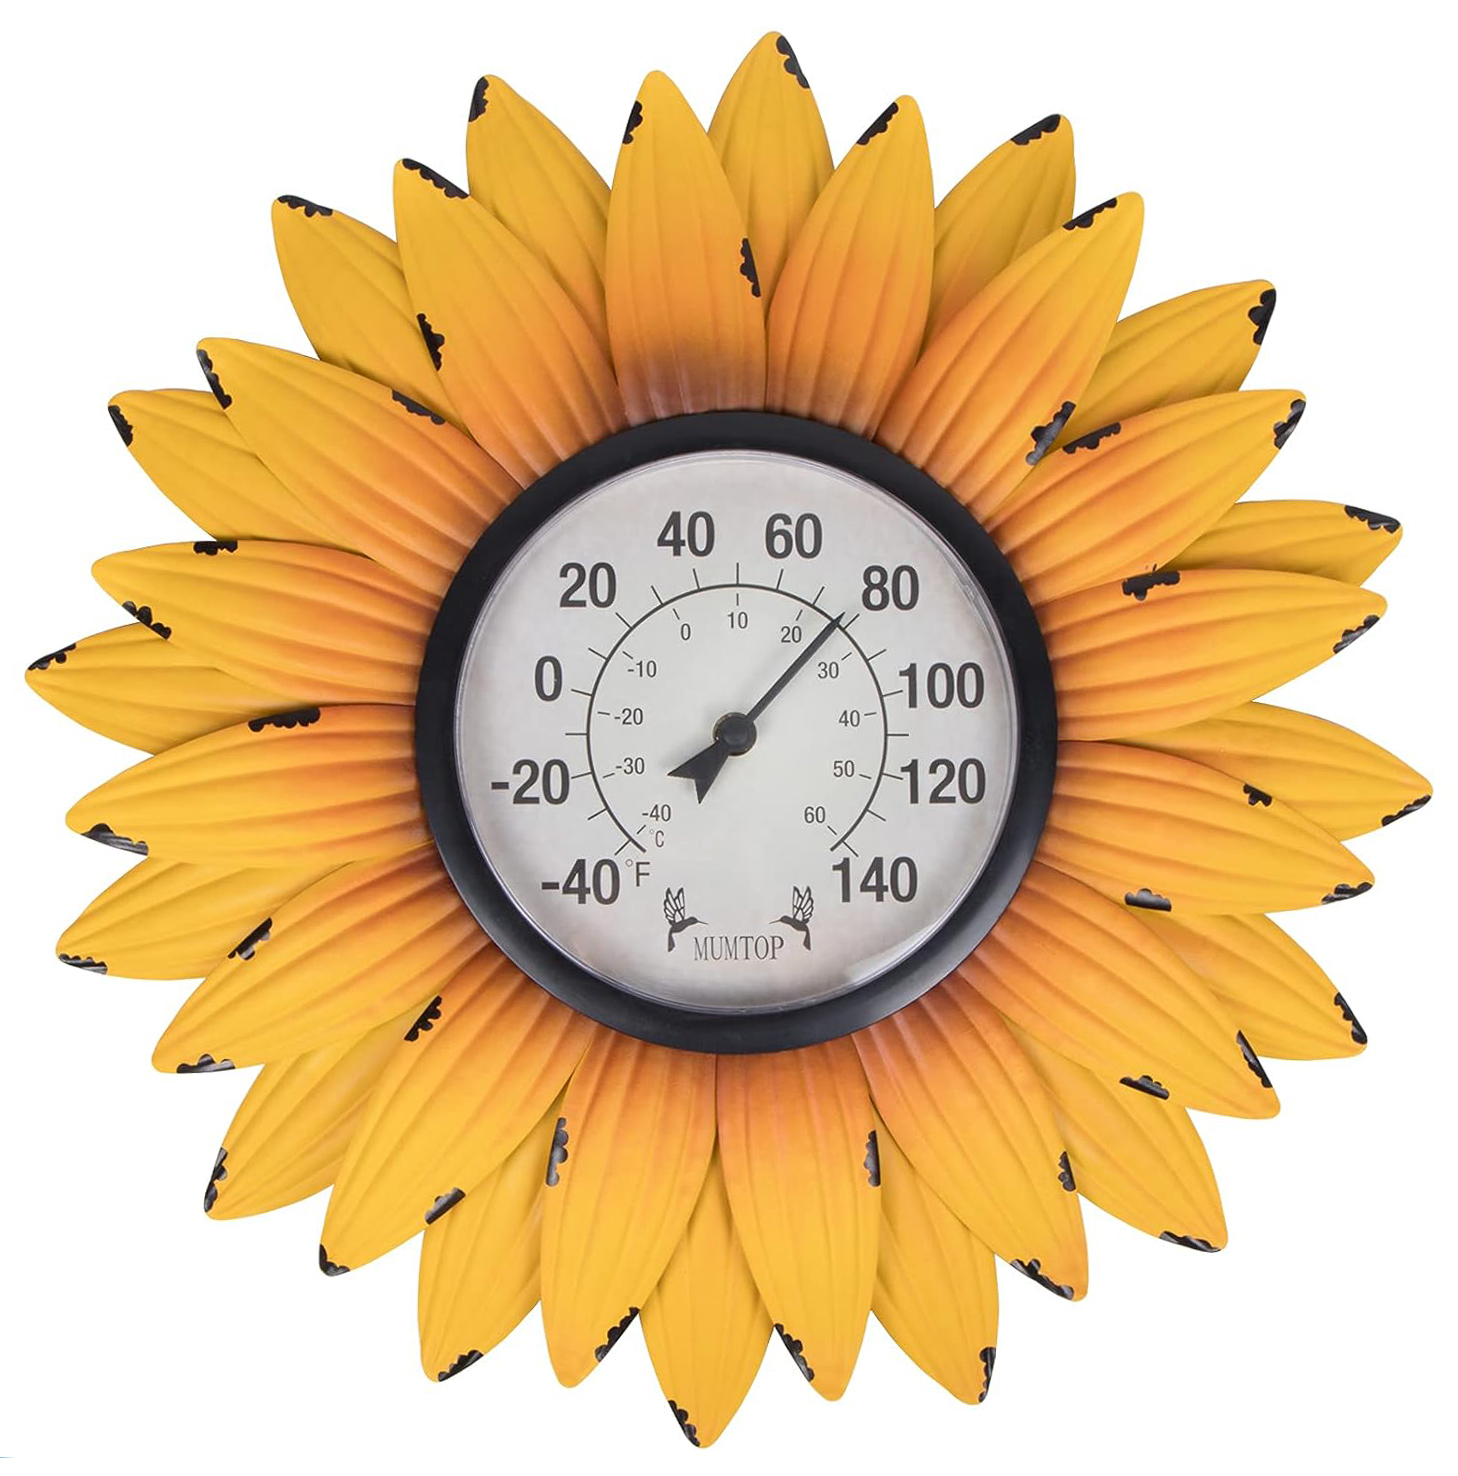 Outdoor Thermometers for Patio-Outdoor Thermometer - Patio Thermometer Wall Thermometer Sunflower Enclosure for Patio, Wall or Decorative, No Battery Required Hanging Thermometer